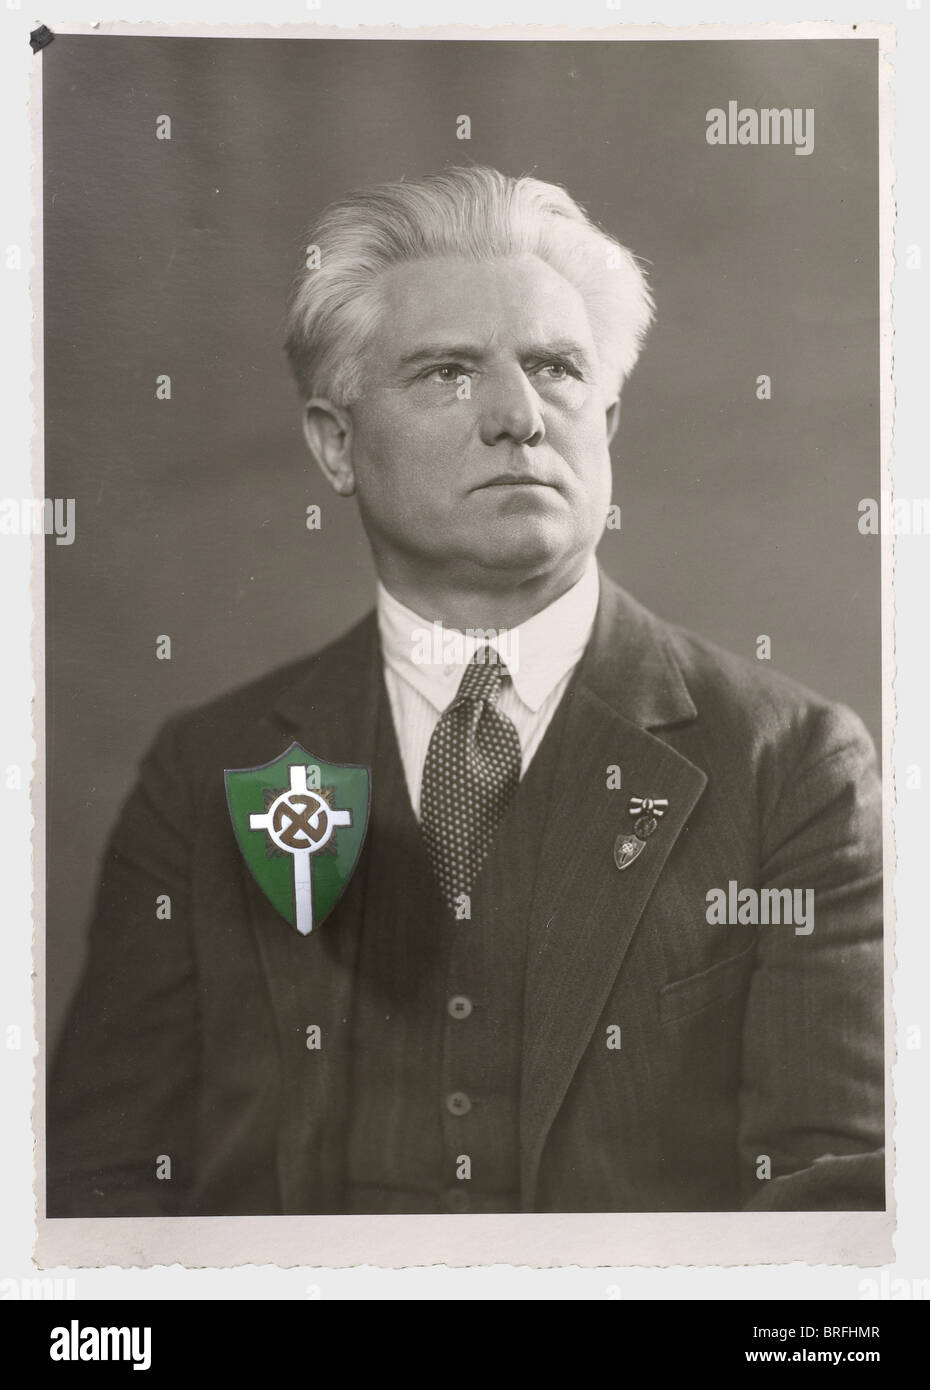 Artur Dinter - German People's Church, photos, badges, documents, and newspapers. Green-white enamelled personal badge of the German People's Church, with portrait picture of Dinter wearing the badge on his lapel. 15 portrait photos with ink signatures of the leading figures of the German People's Church, conjoined on passepartout, framed, 50 x 40 cm. Two files with hardback editions of the journal 'Die religiöse Revolution - Kampfblatt der deutschen Volkskirche E.V. - Kampfbund', Vol. 1/1934 till Vol. 4/1937. Also documents and correspondence dealing with the , Stock Photo